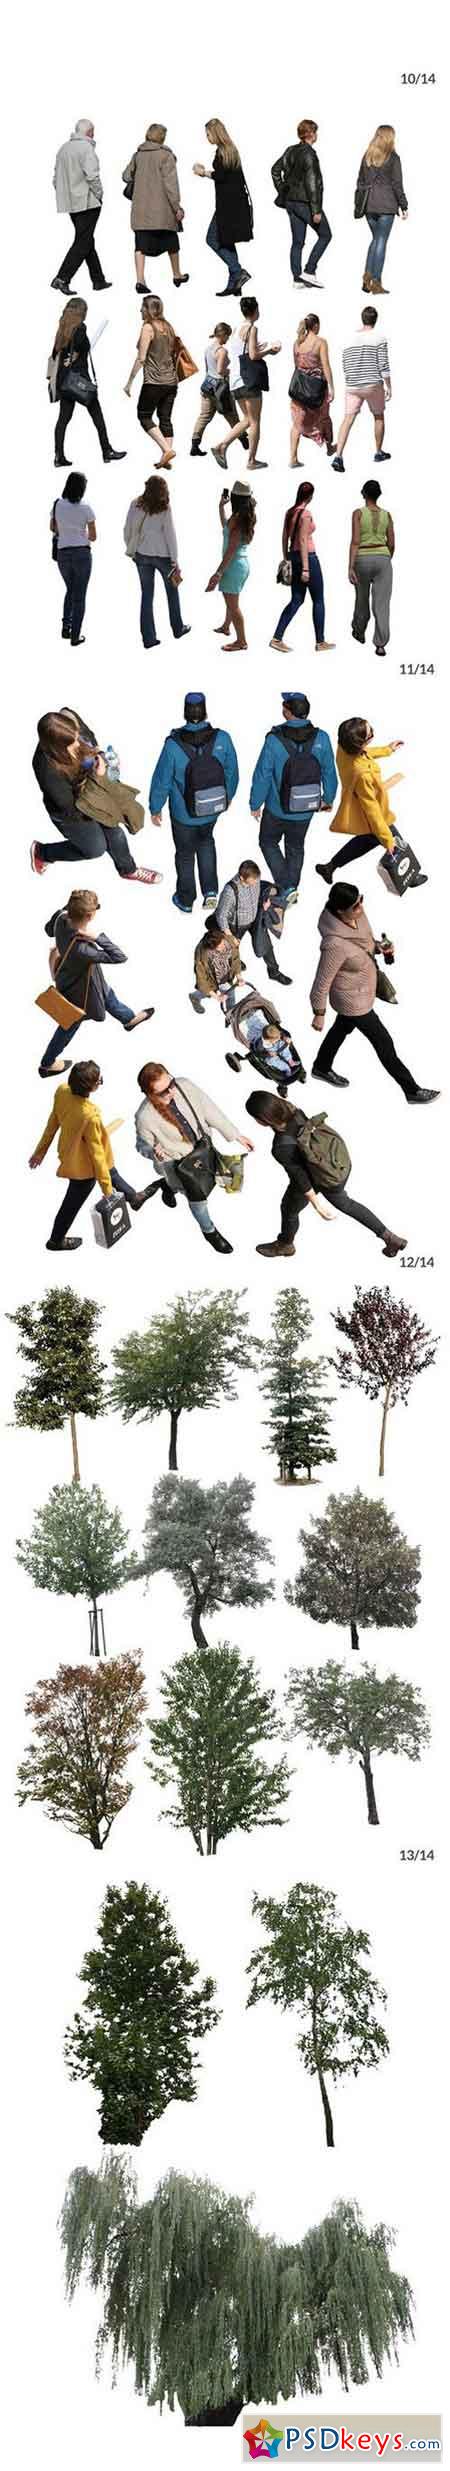 251 Cut out people, trees and leaves 1545717